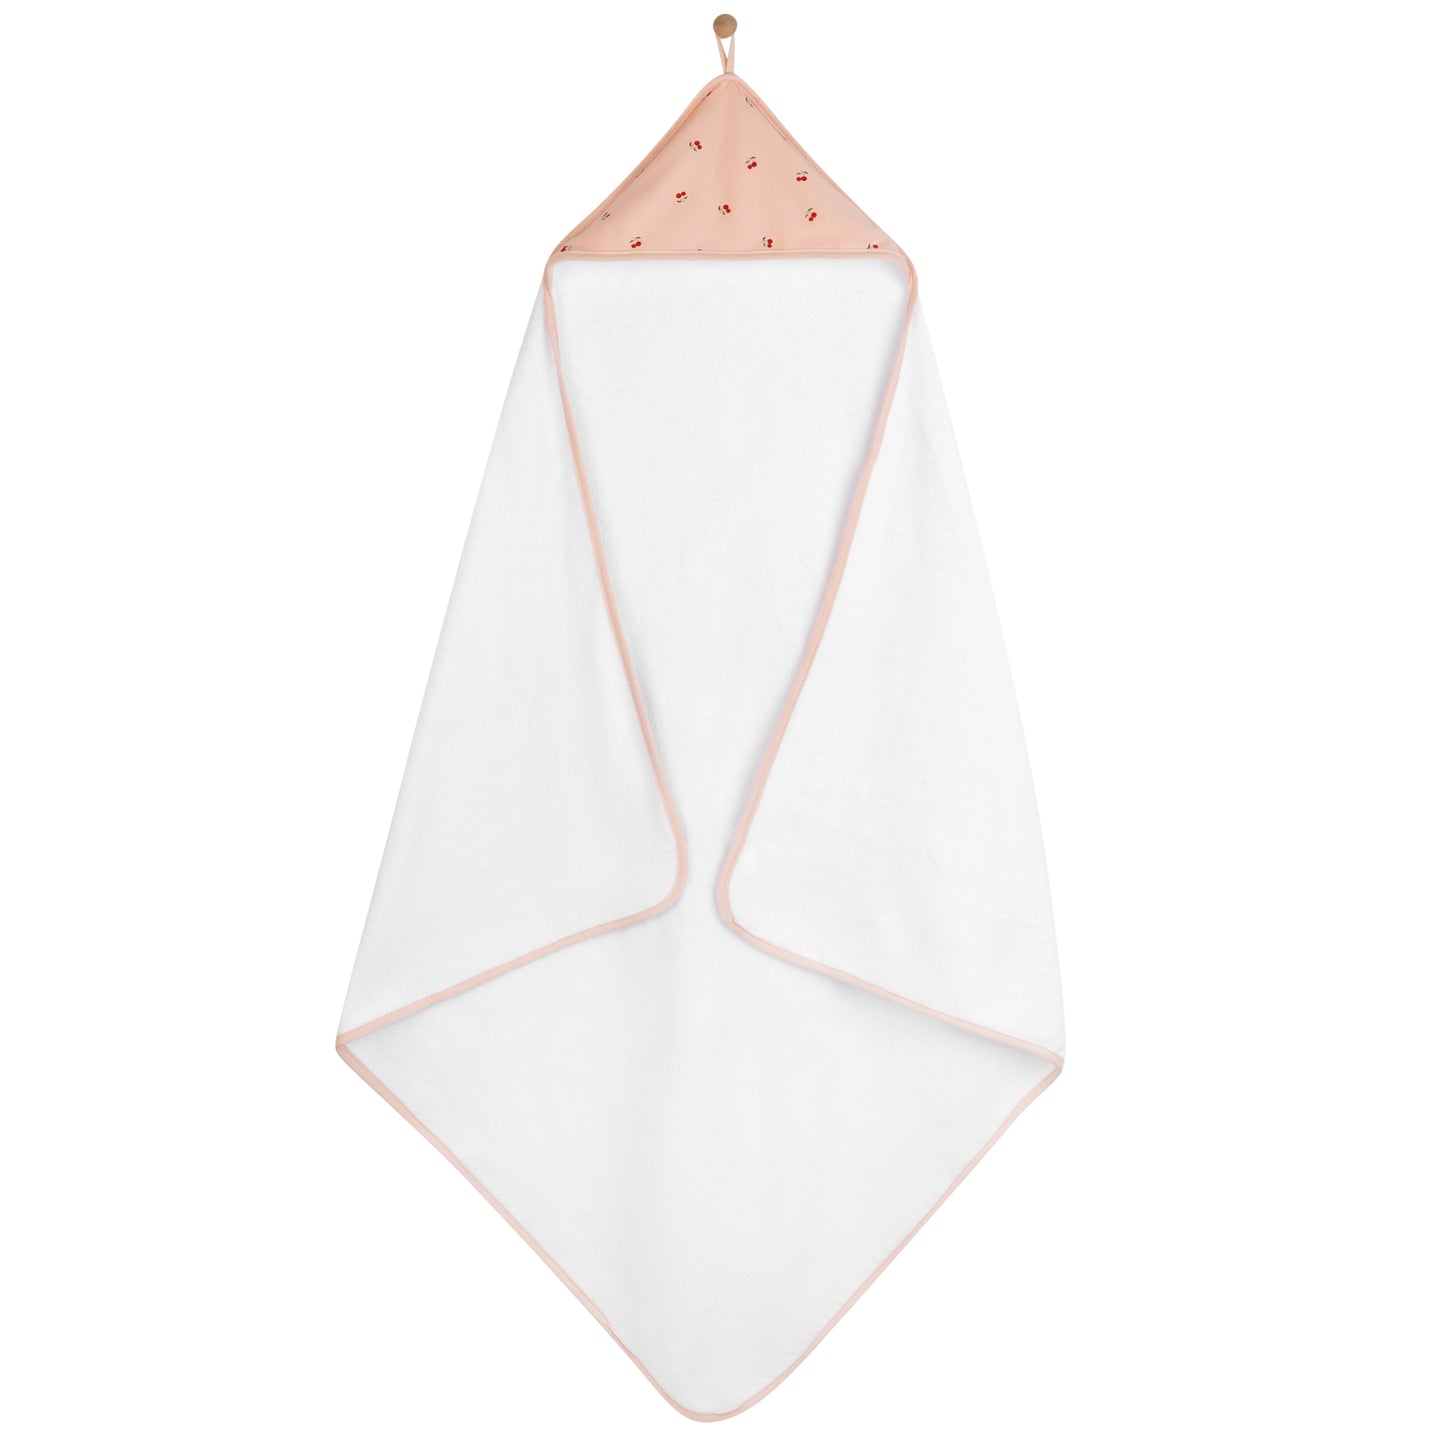 Ely's & Co. Hooded Towel and Washcloth Set